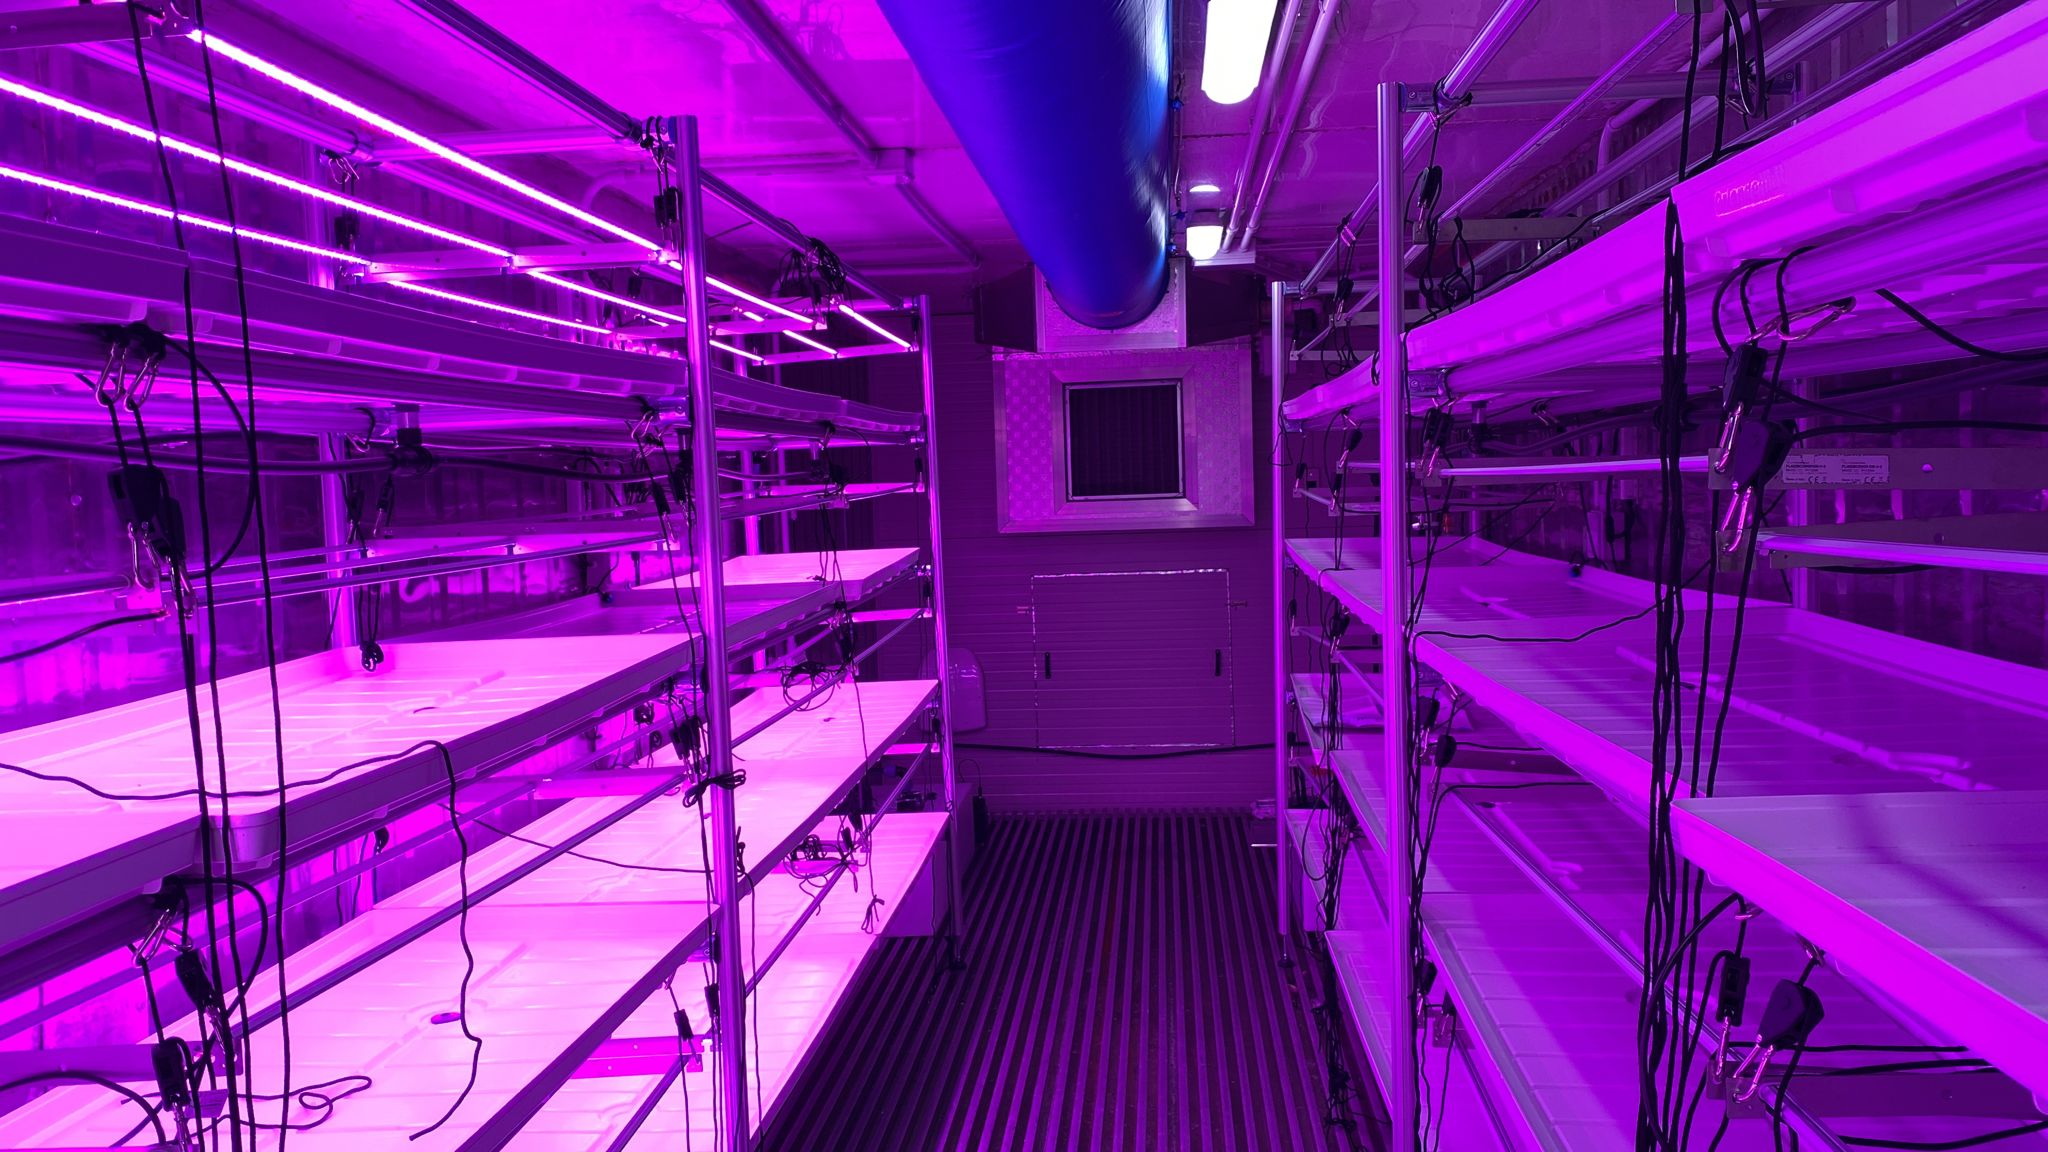 Inside the container farm